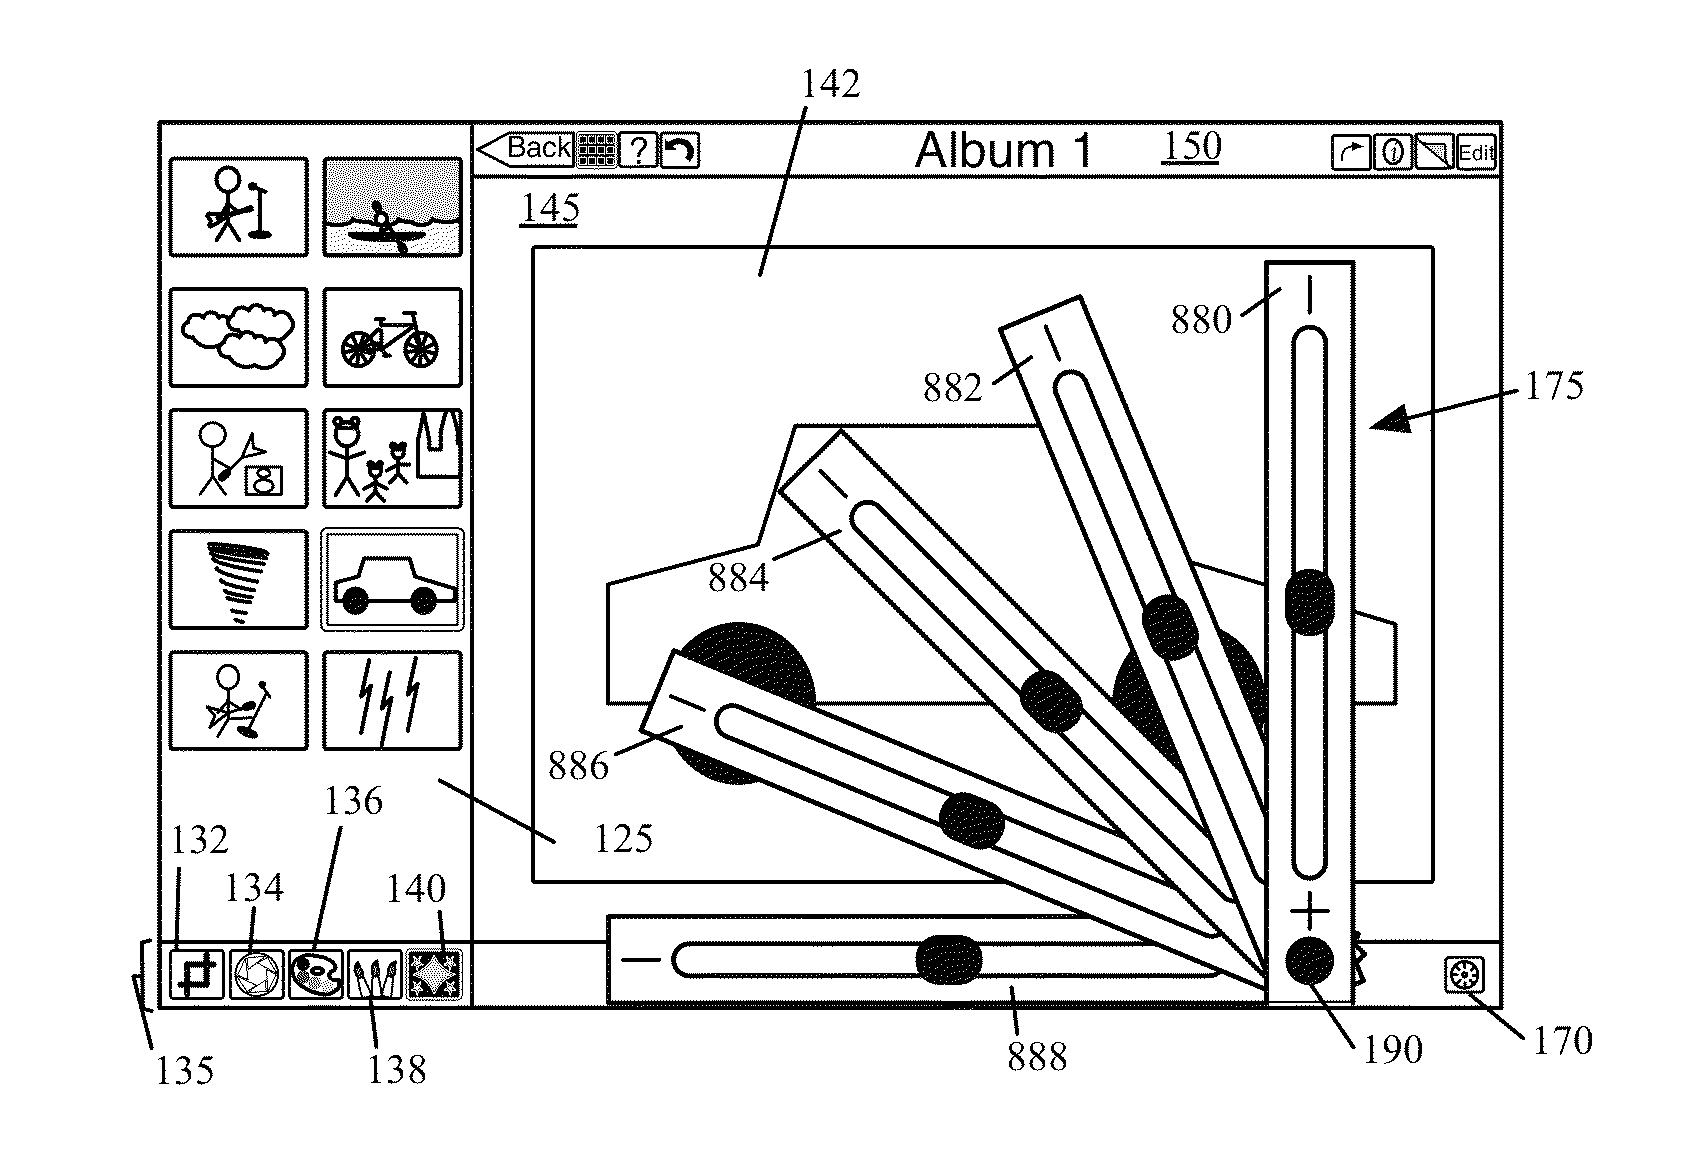 Fanning user interface controls for a media editing application